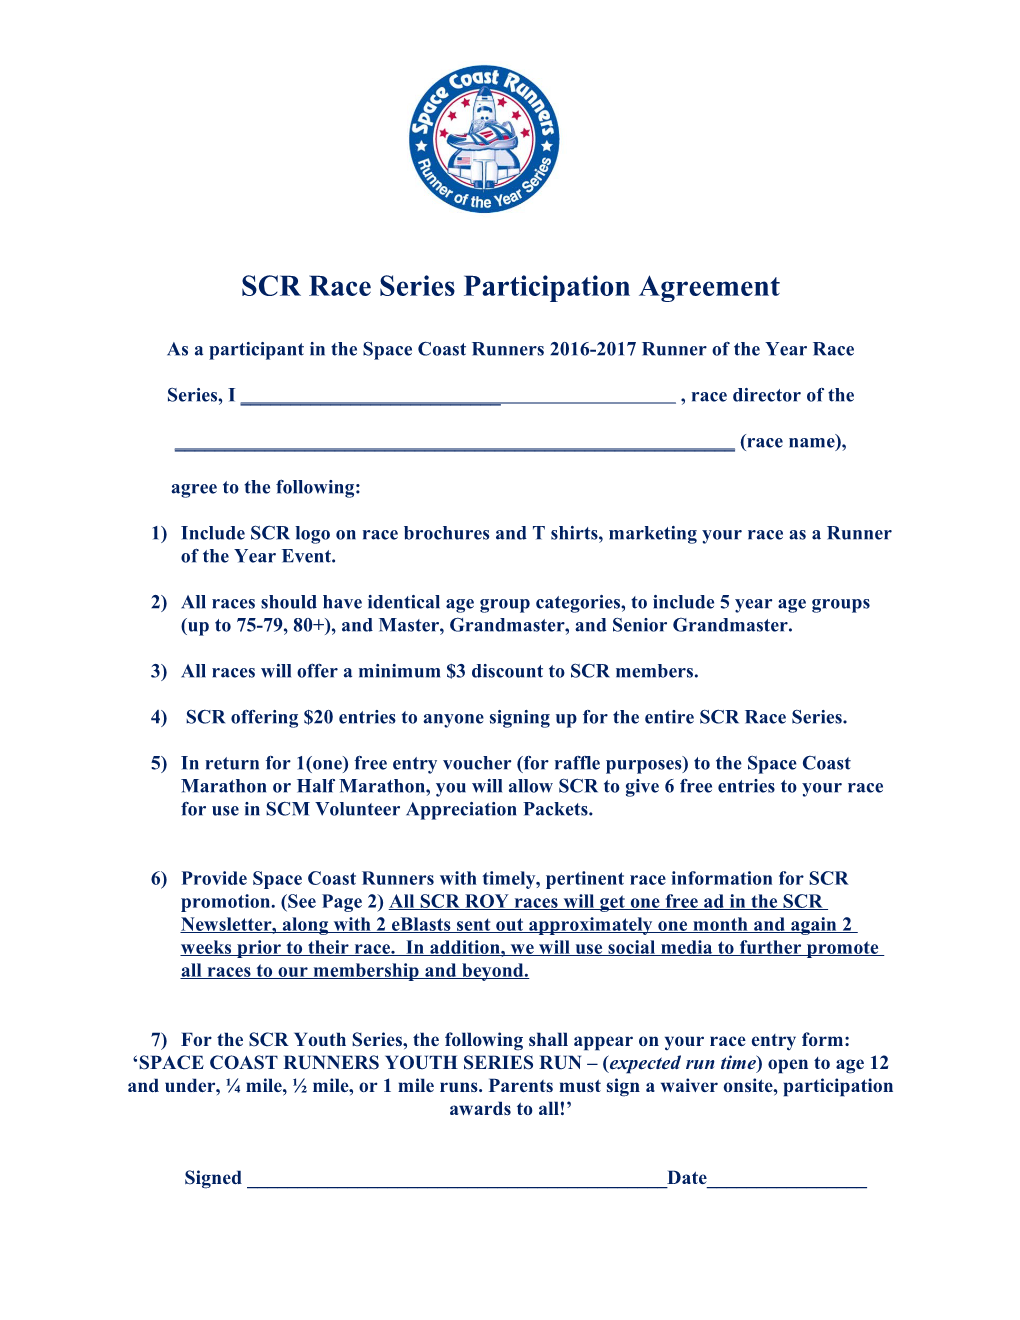 SCR Race Series Participation Contract